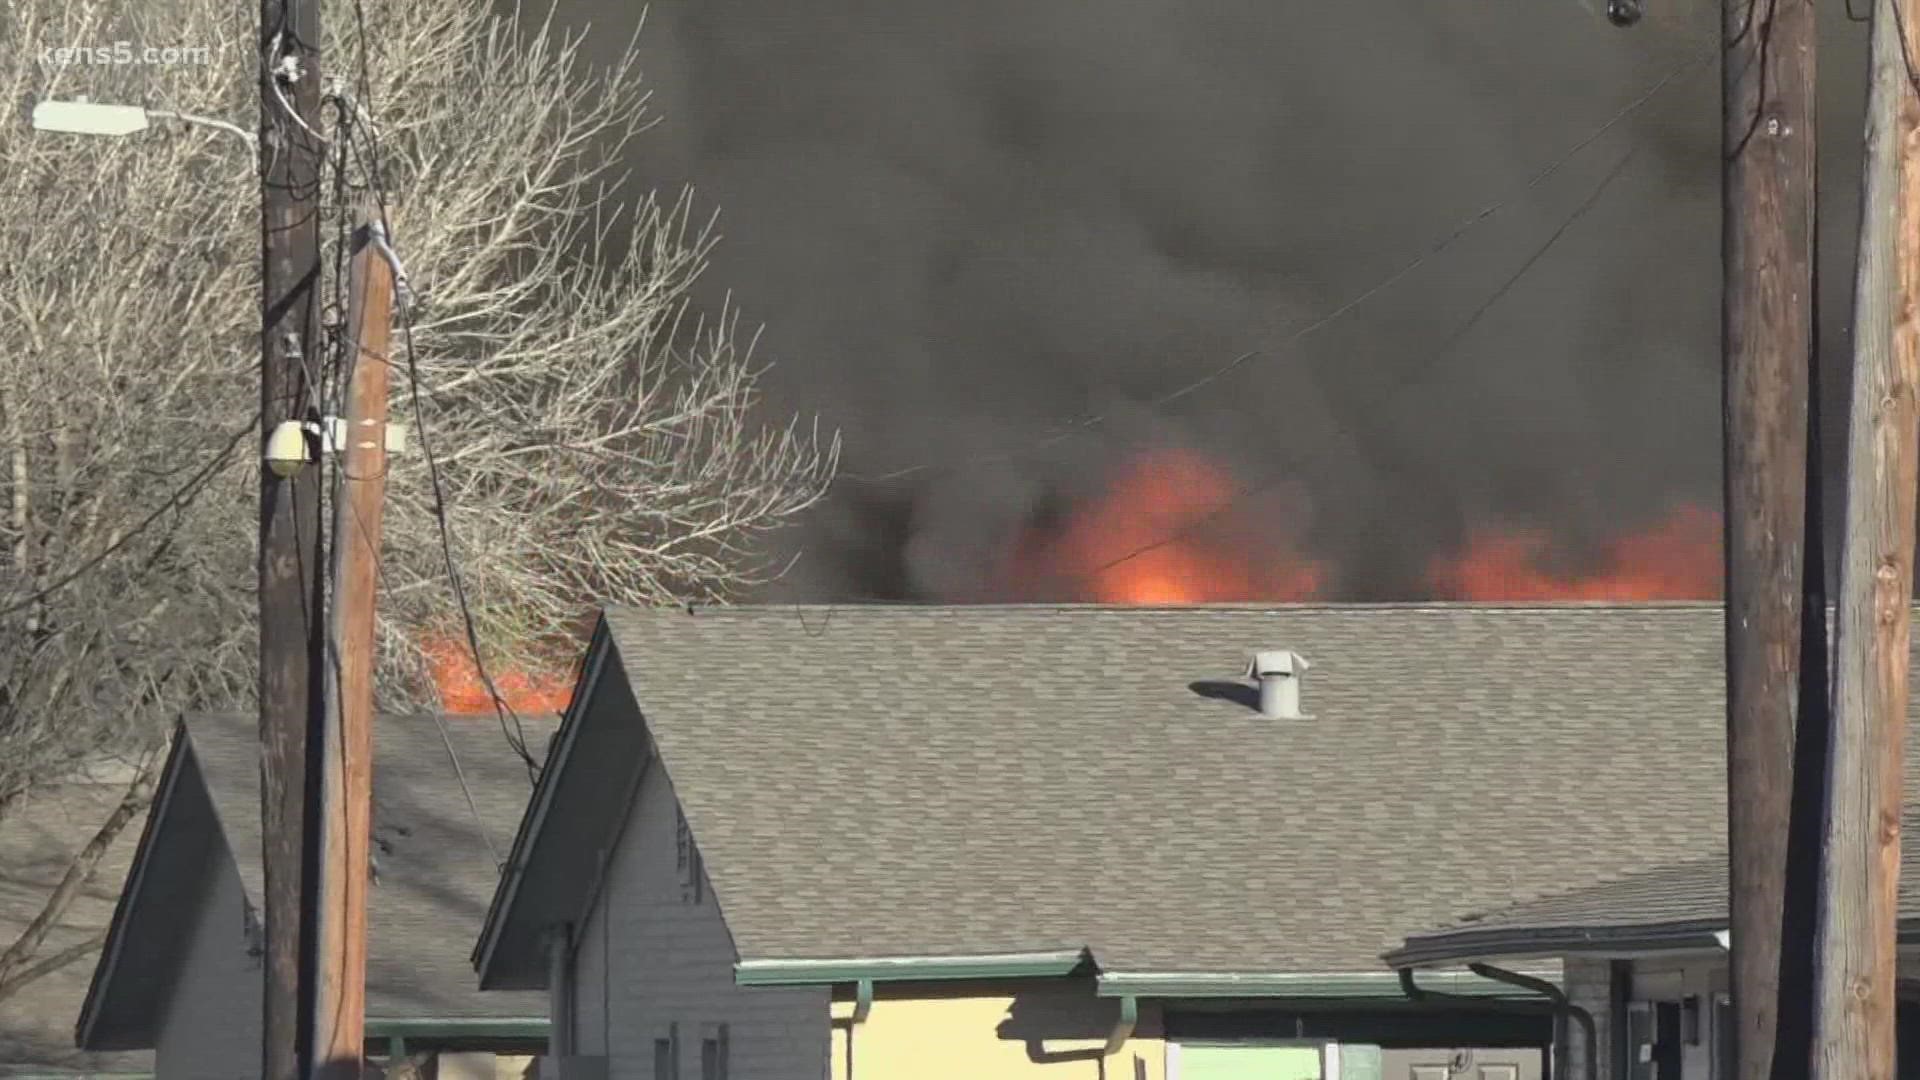 Smoke and flames were visible from the fire at an apartment complex on Ray Bon Dr. on Sunday afternoon.